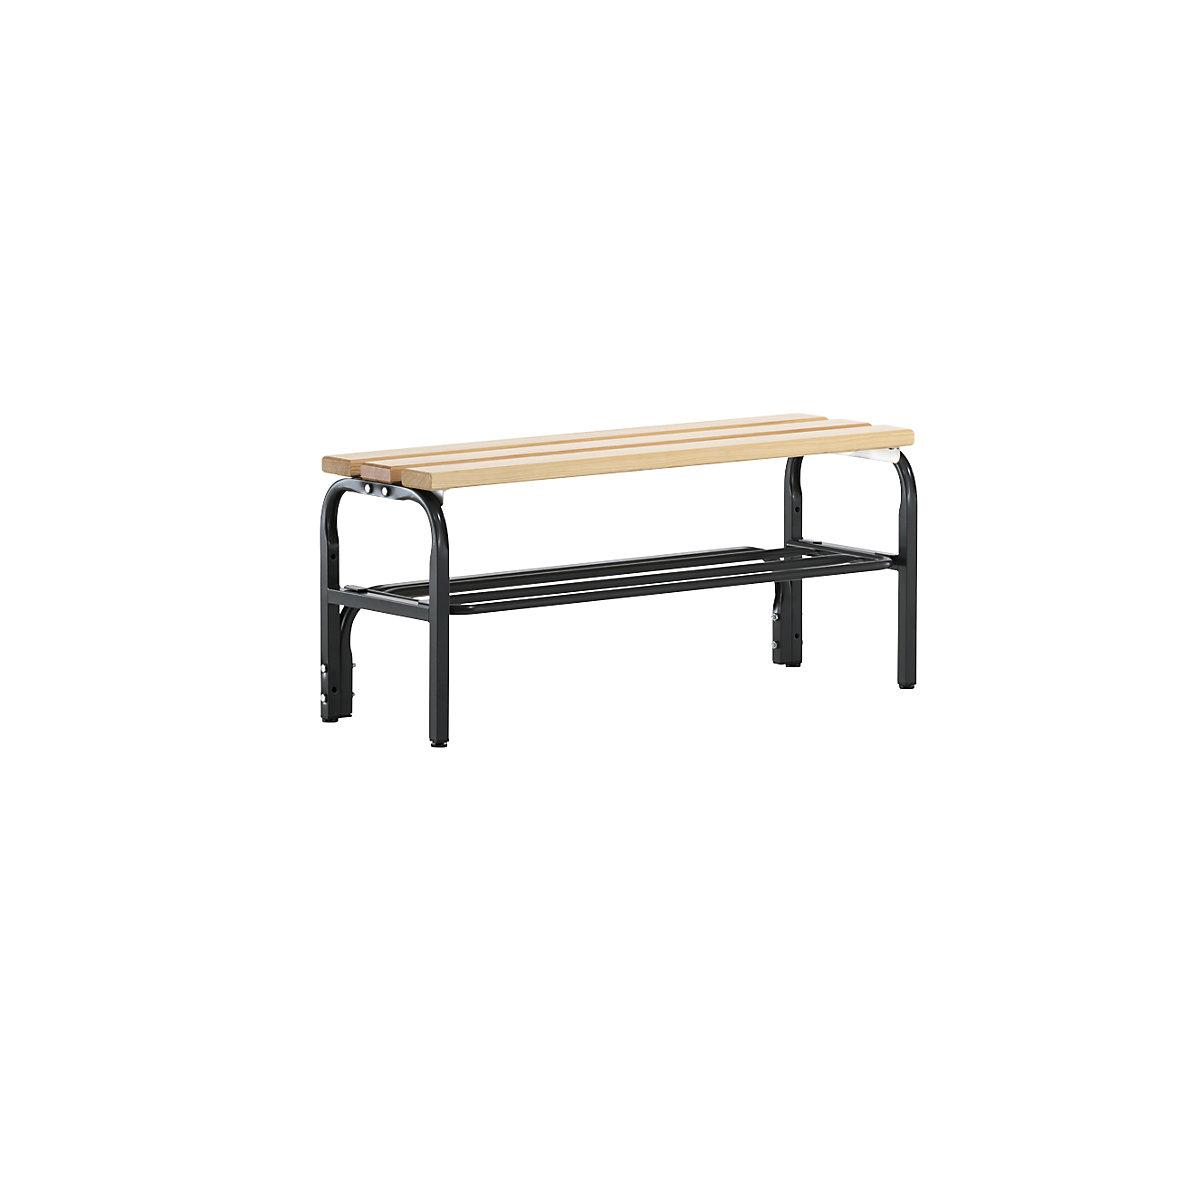 Sypro – Cloakroom bench, single sided, with shoe rack, length 1015 mm, charcoal